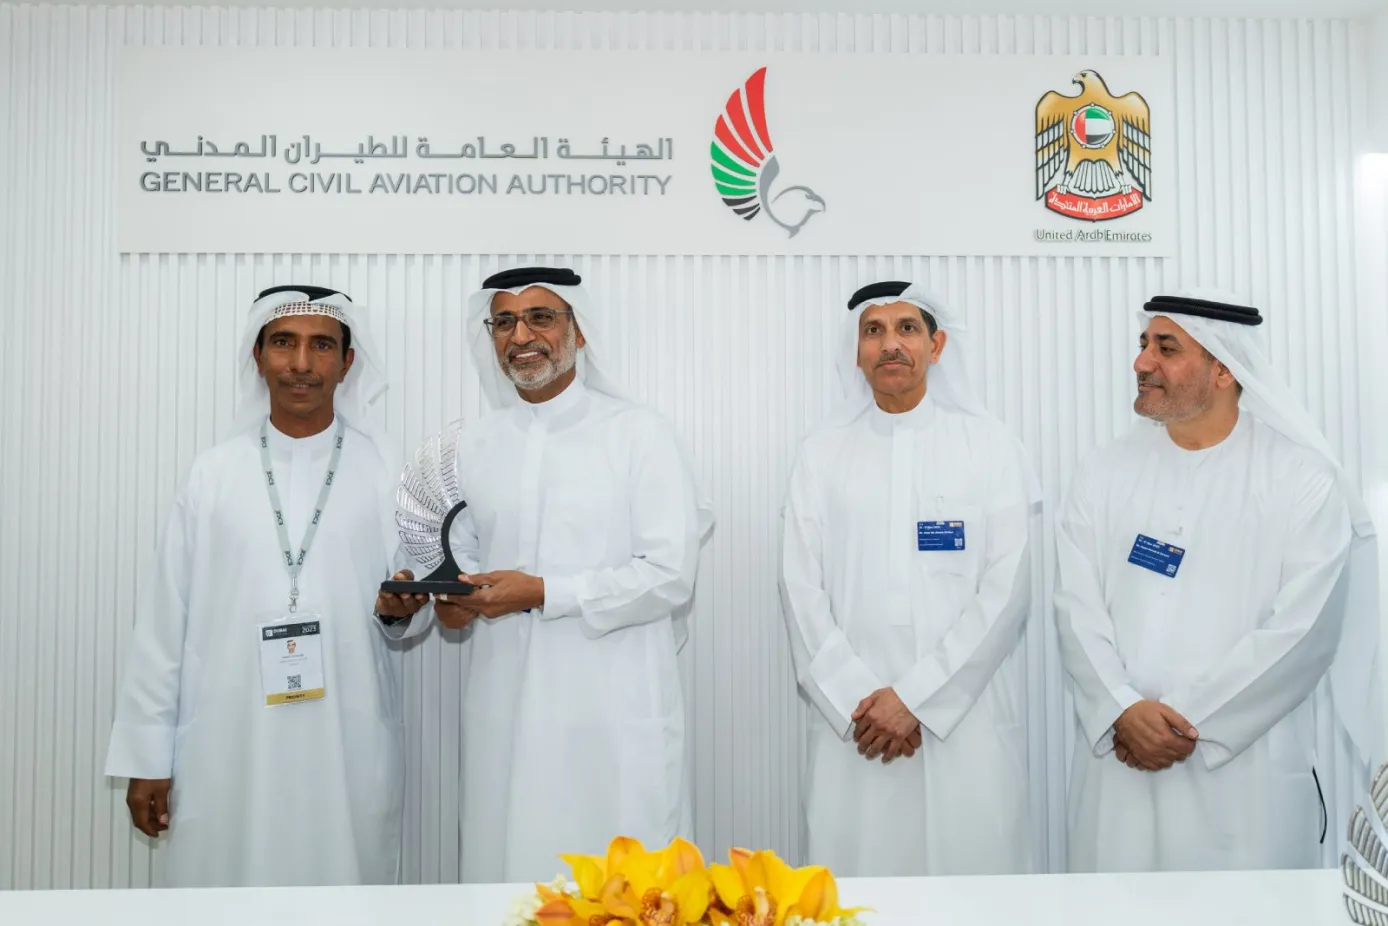 EDGE is Presented with the Aviation Safety Award from the General Civil Aviation Authority